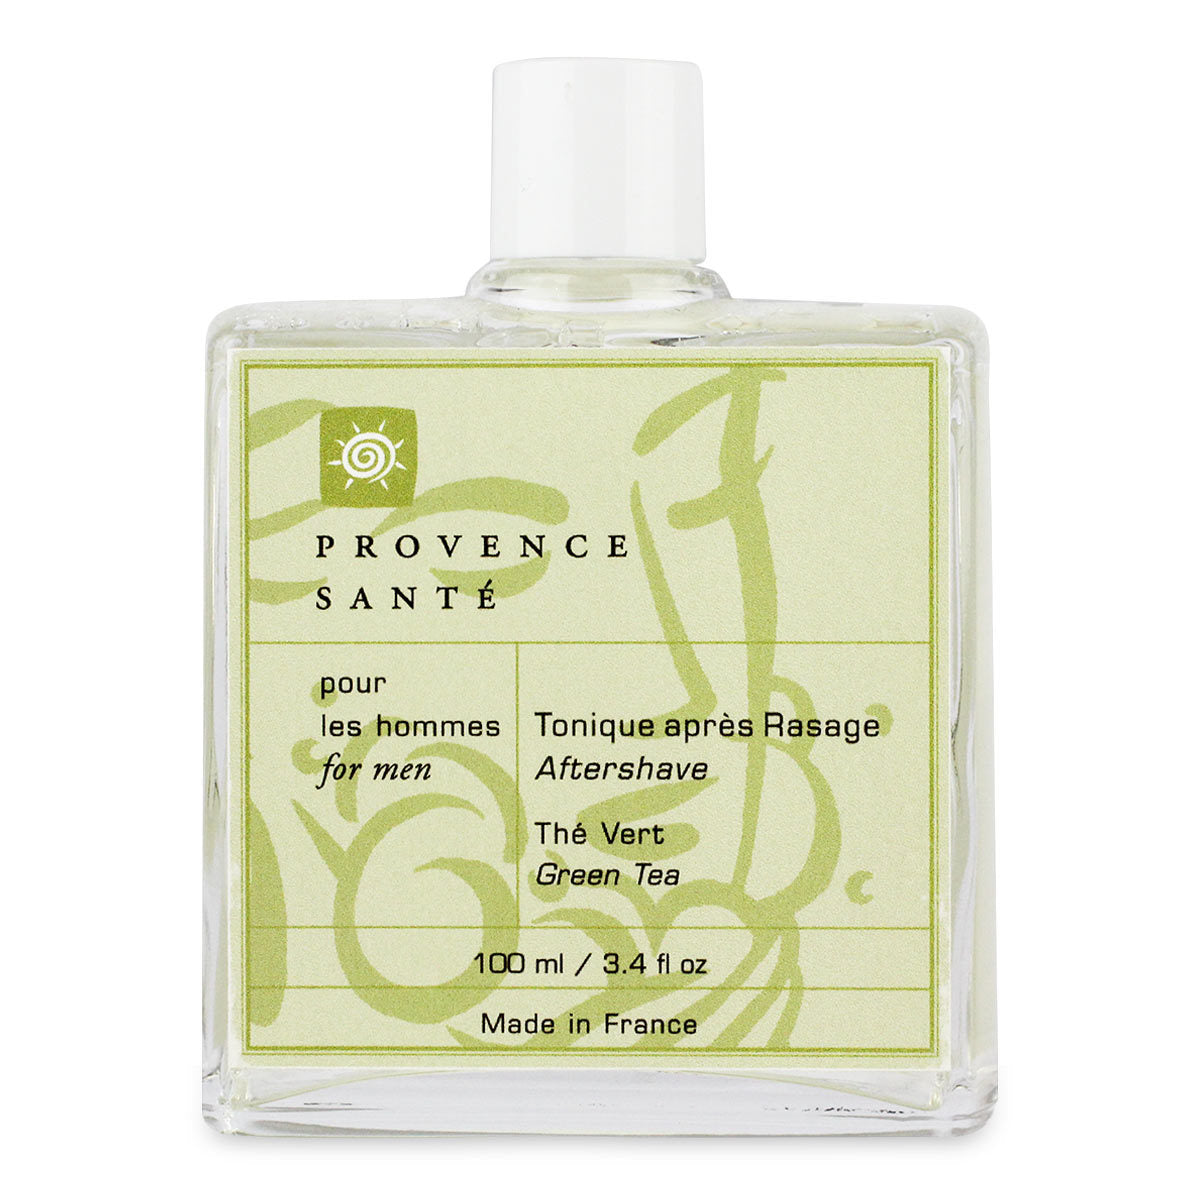 Primary image of Green Tea After Shave